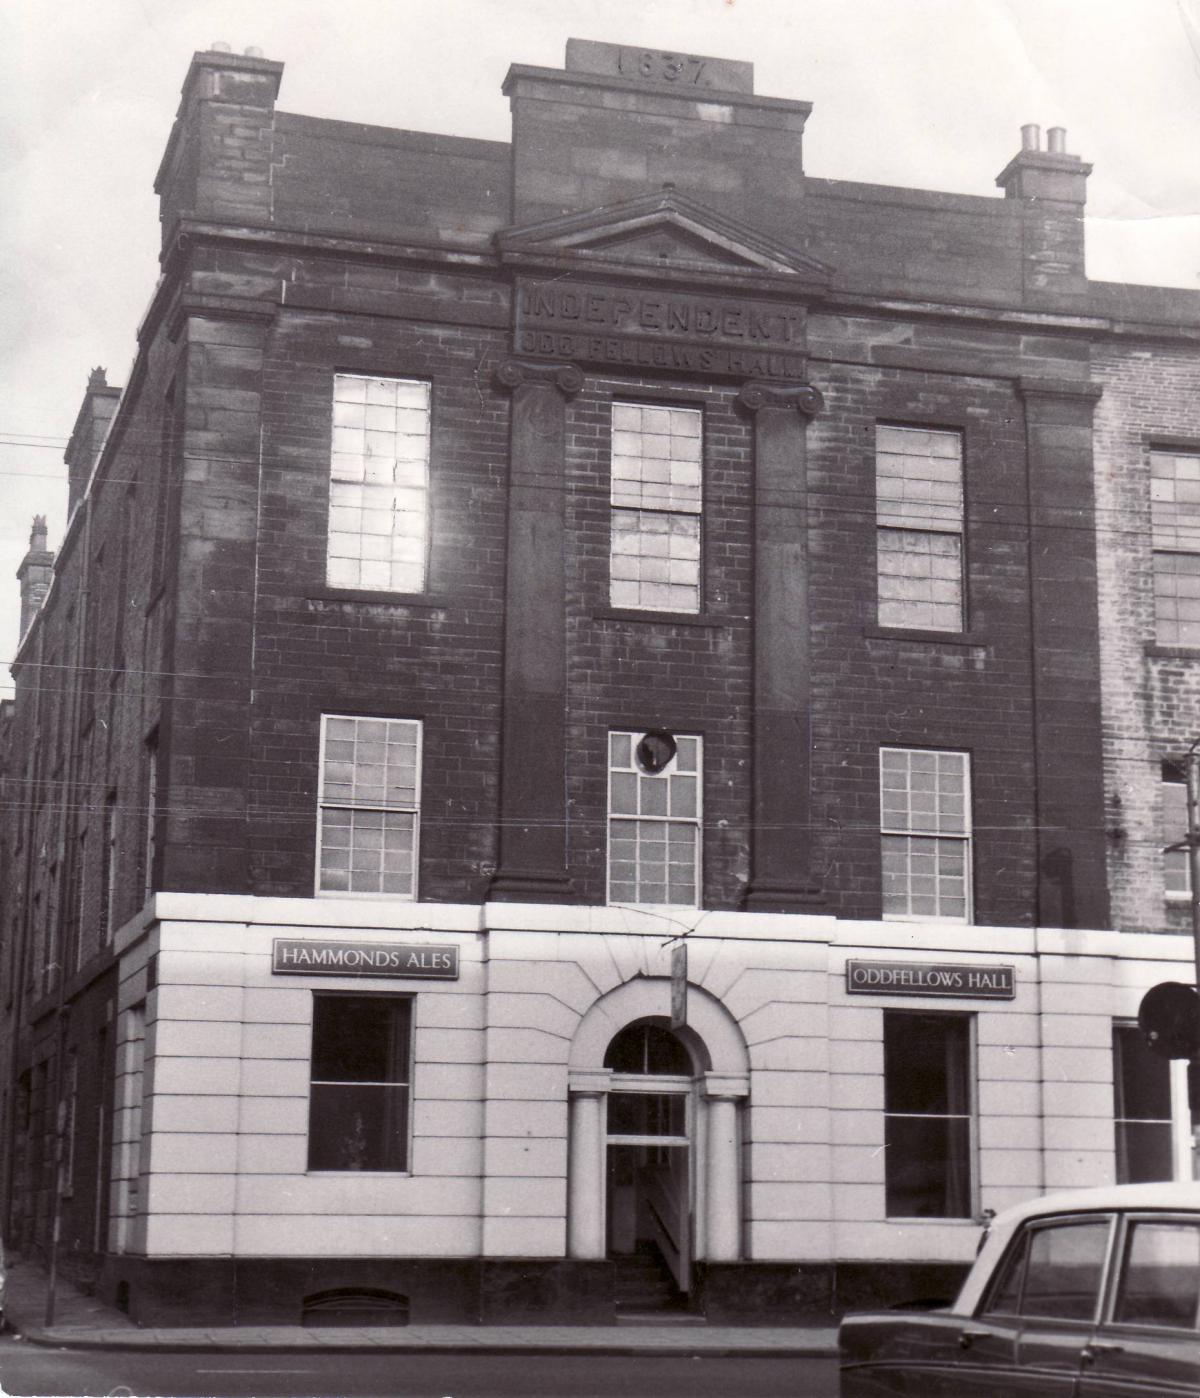 Odd Fellows Hall in Thornton Road, which is now demolished, opened in 1837